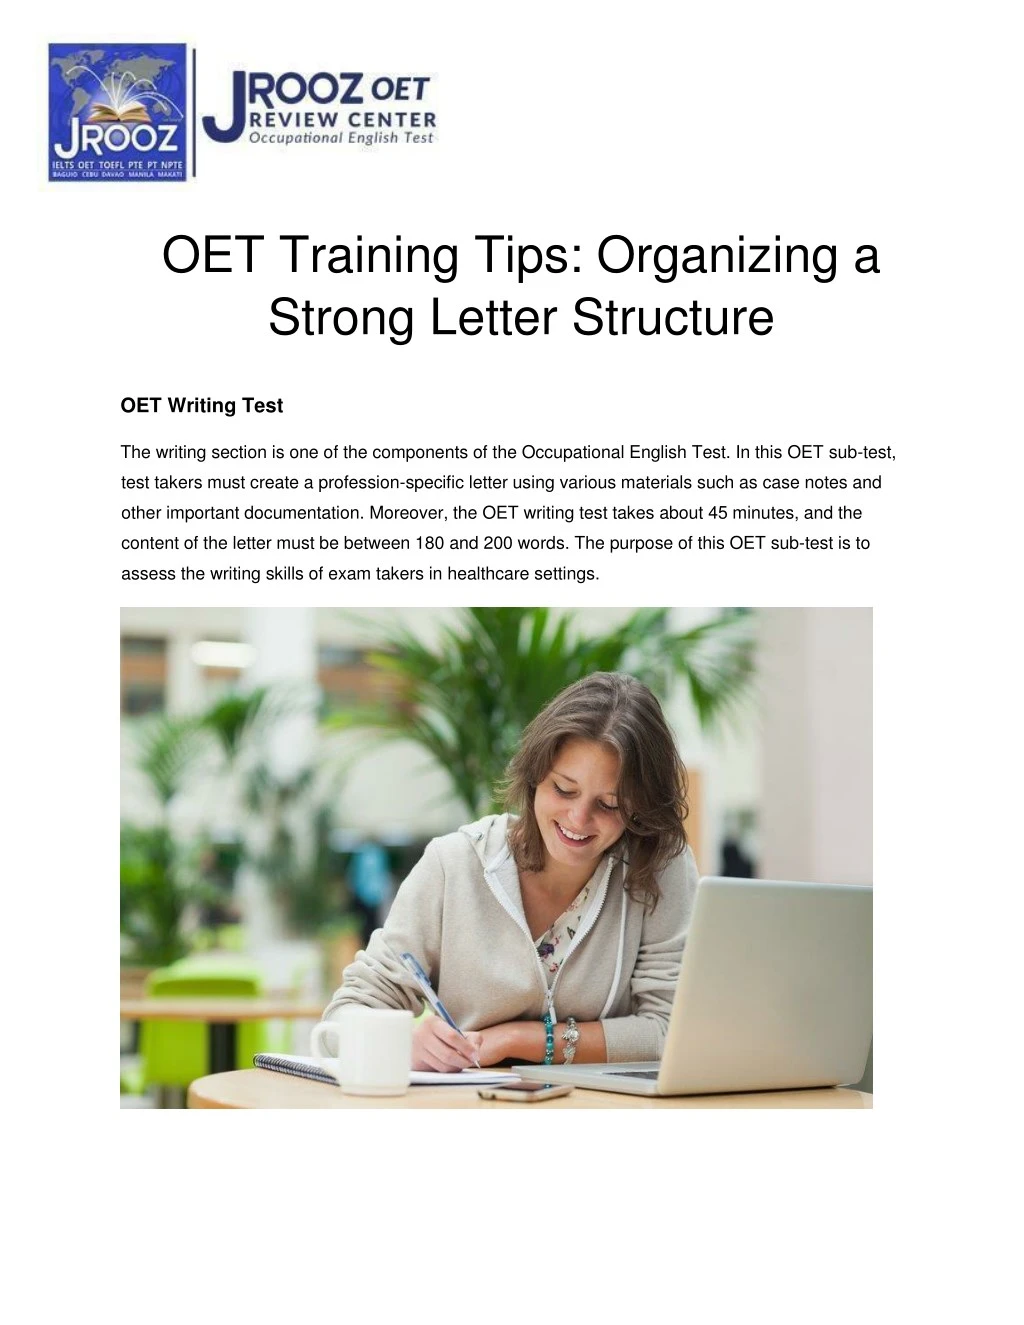 oet training tips organizing a strong letter